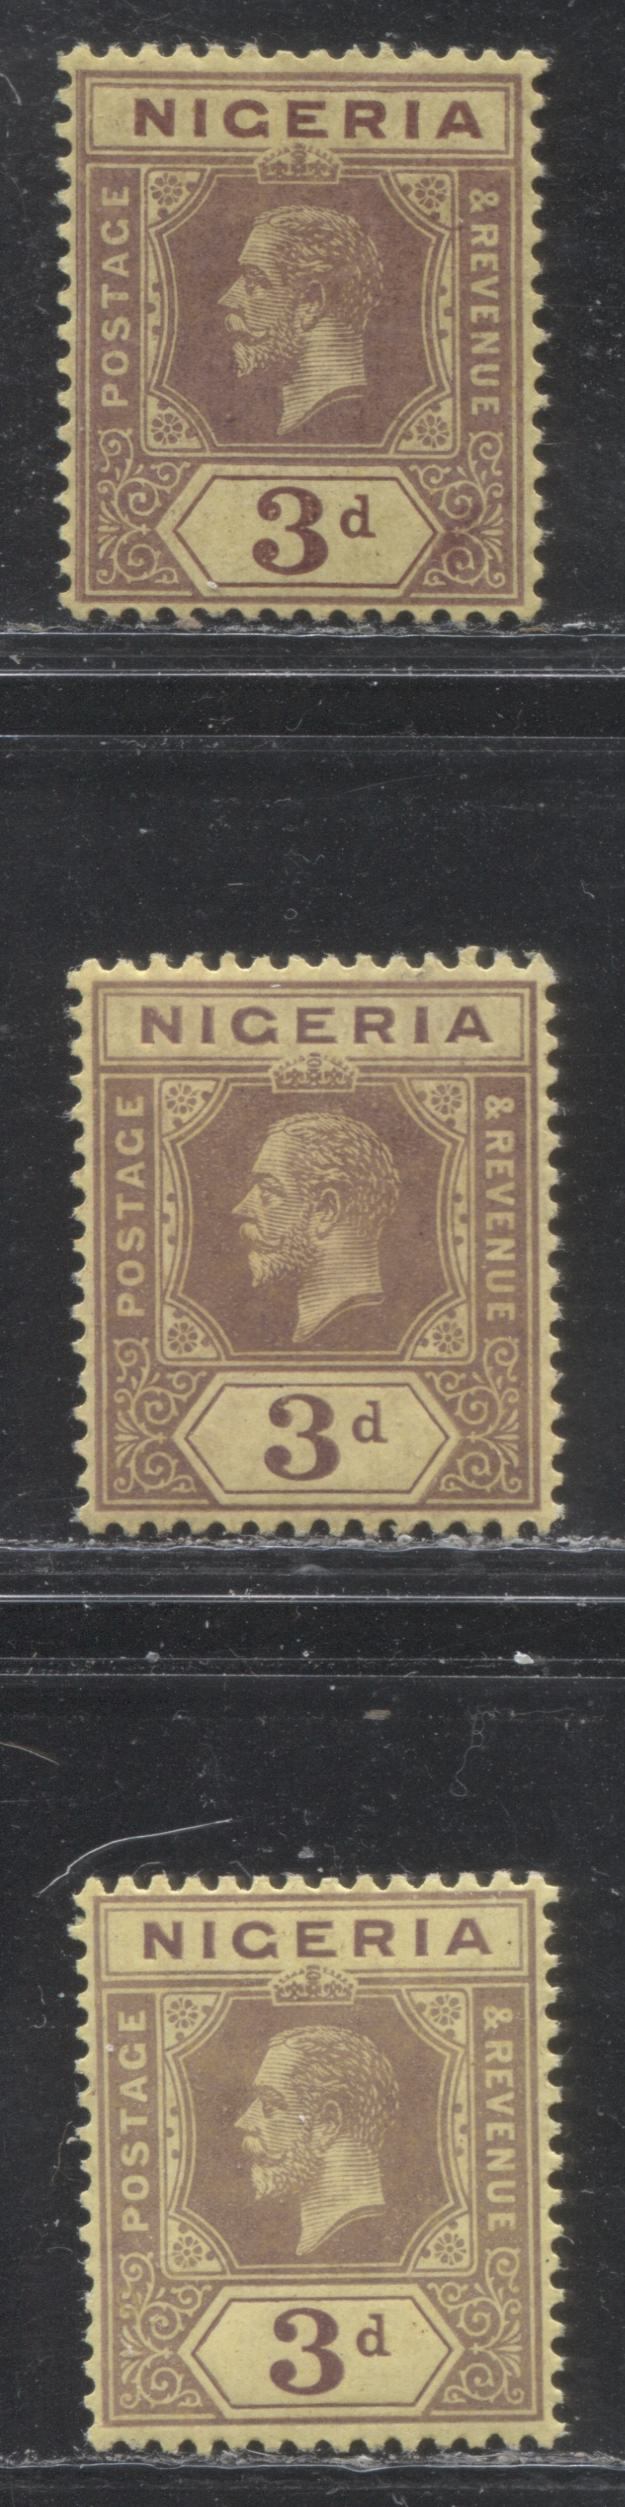 Lot 192 Nigeria SG# 5e 3d Chocolate & Dull Purple on Yellow Paper With Pale Yellow Back King George V, 1914-1921 Multiple Crown CA Imperium Keyplate Issue, Three VFOG Examples, From Different Printings, Each a Slightly Different Shade